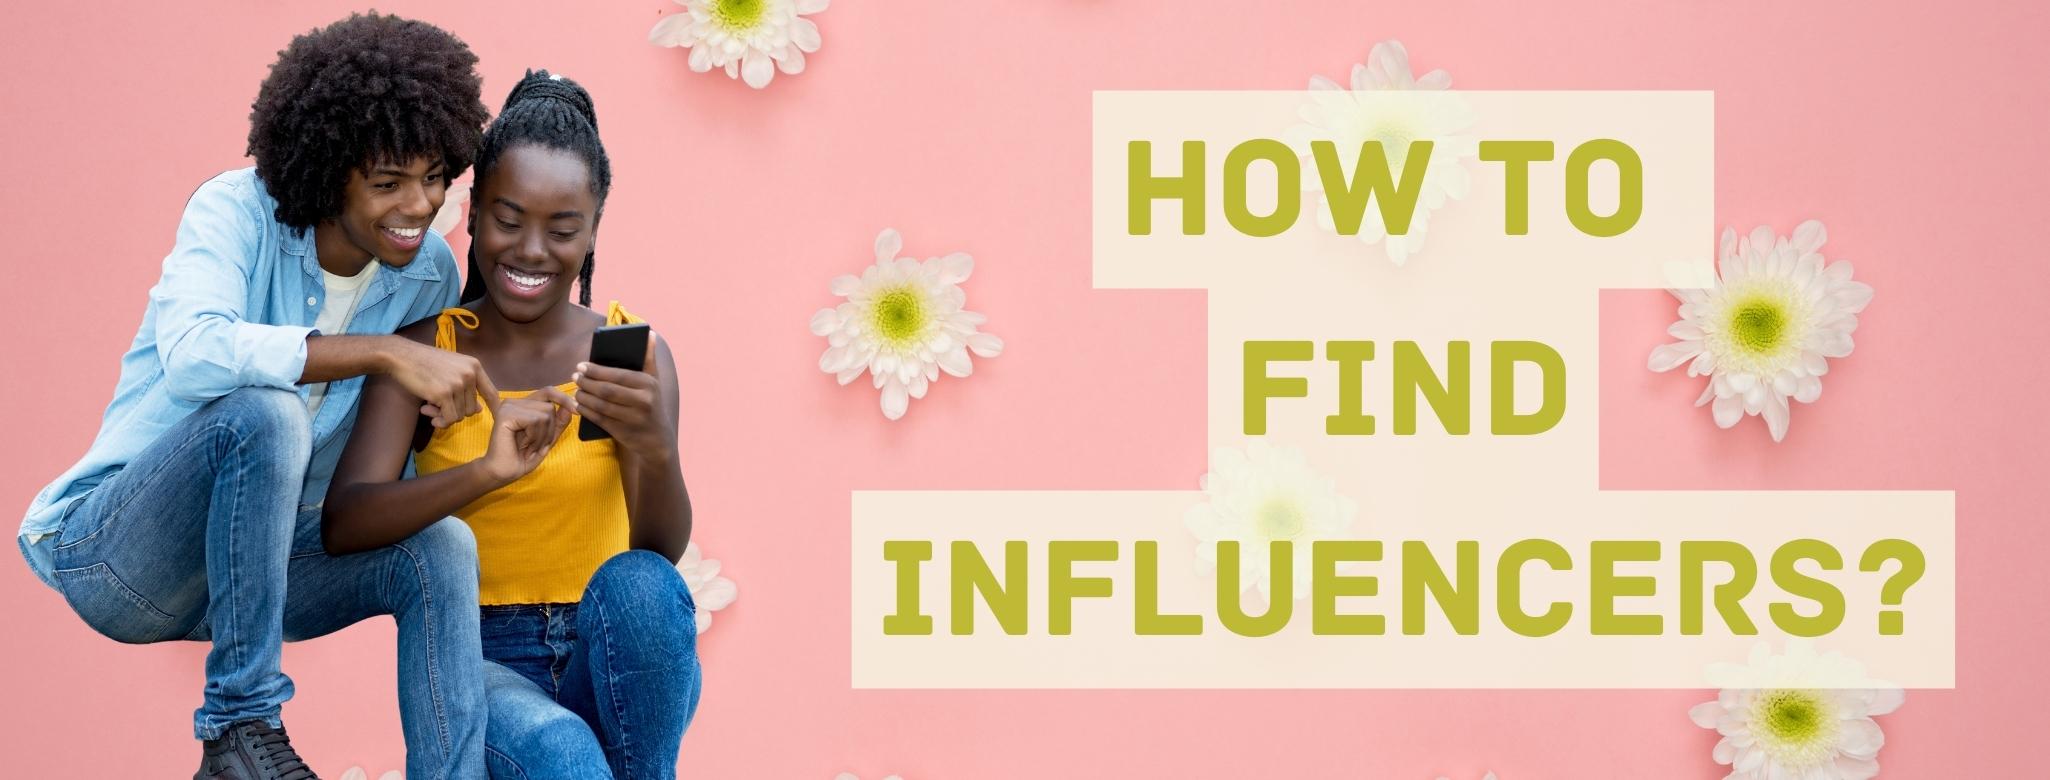 how to find influencers